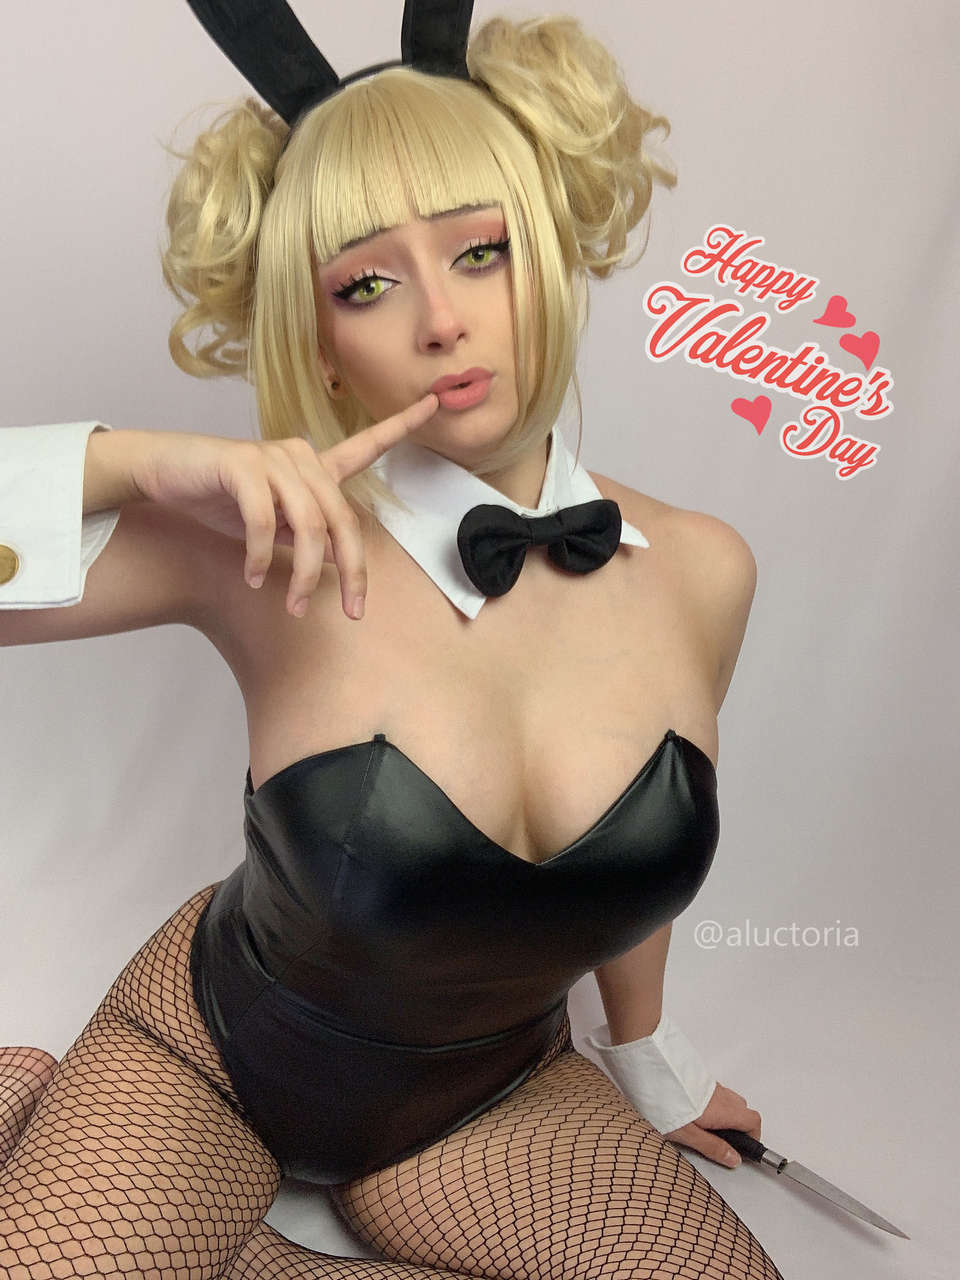 Toga Bunnygirl By Aluctori